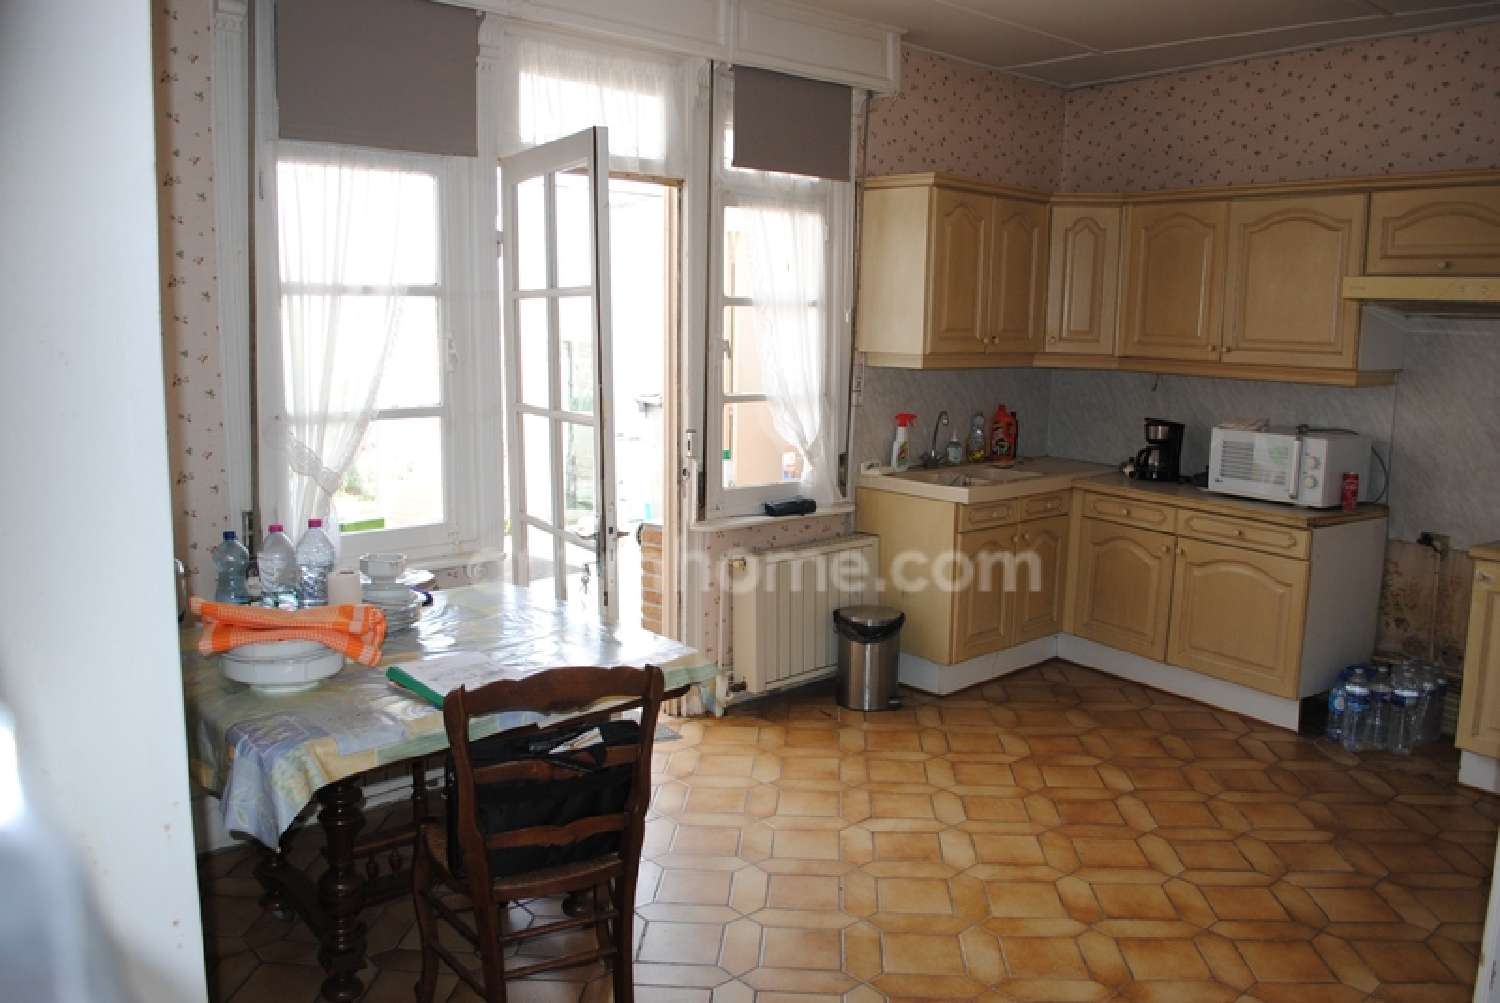  for sale house Linselles Nord 3